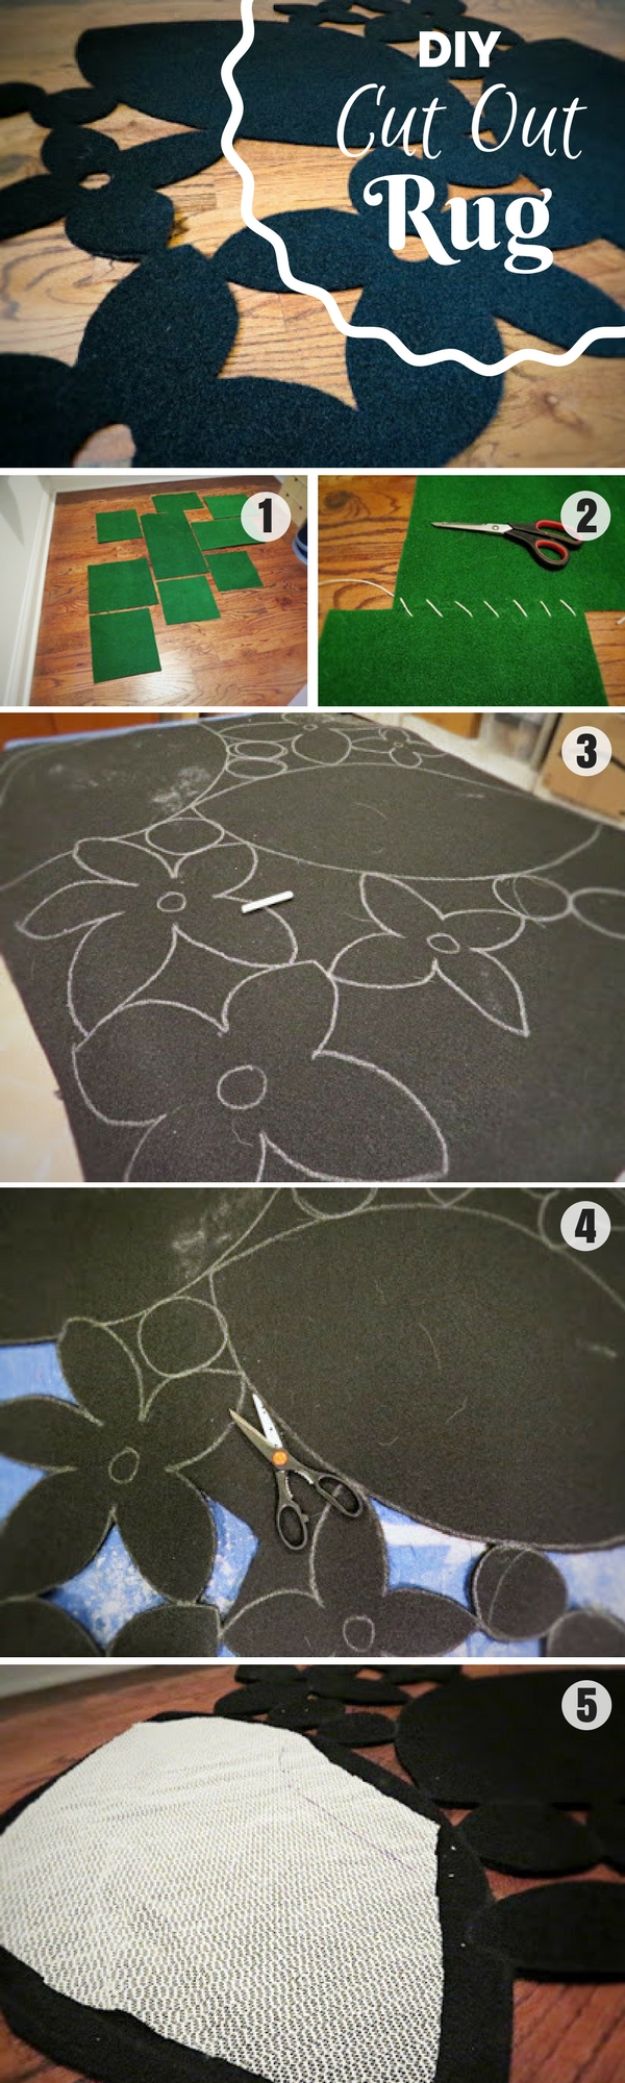 DIY Rugs - DIY Cut-Out Rug - Ideas for An Easy Handmade Rug for Living Room, Bedroom, Kitchen Mat and Cheap Area Rugs You Can Make - Stencil Art Tutorial, Painting Tips, Fabric, Yarn, Old Denim Jeans, Rope, Tshirt, Pom Pom, Fur, Crochet, Woven and Outdoor Projects - Large and Small Carpet #diyrugs #diyhomedecor